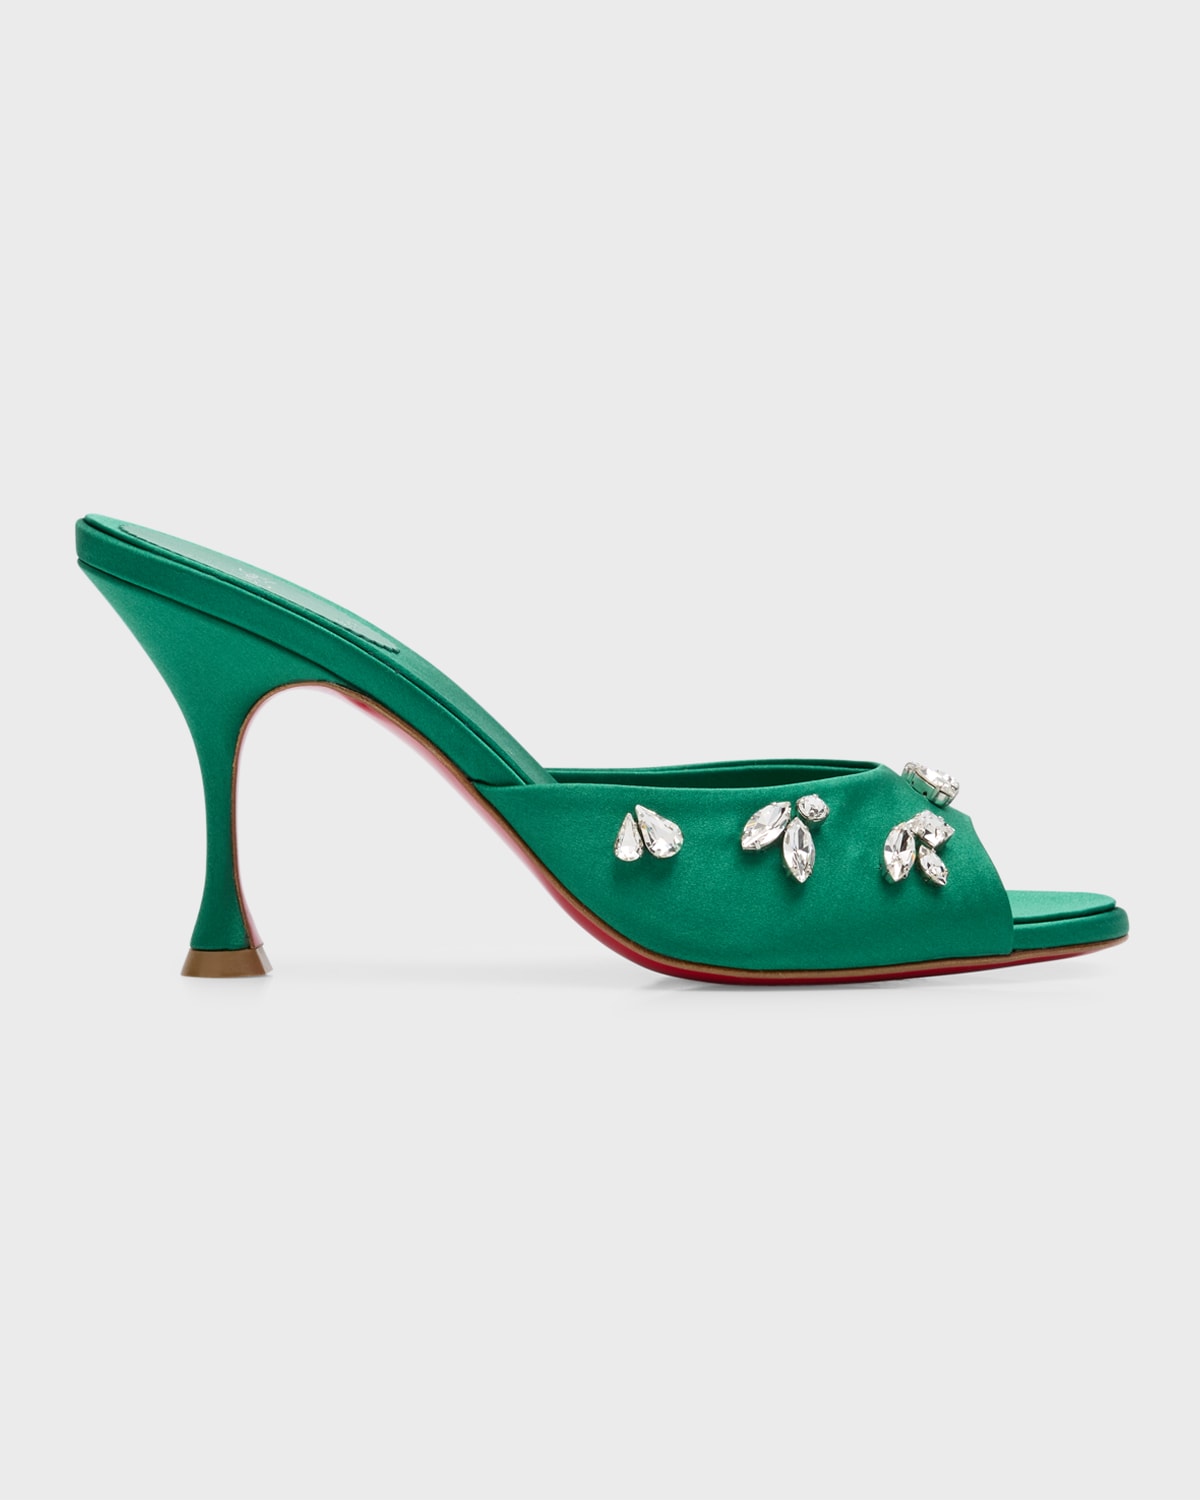 Christian Louboutin Degraqueenie Silk Embellished Red Sole Sandals In Jade Green